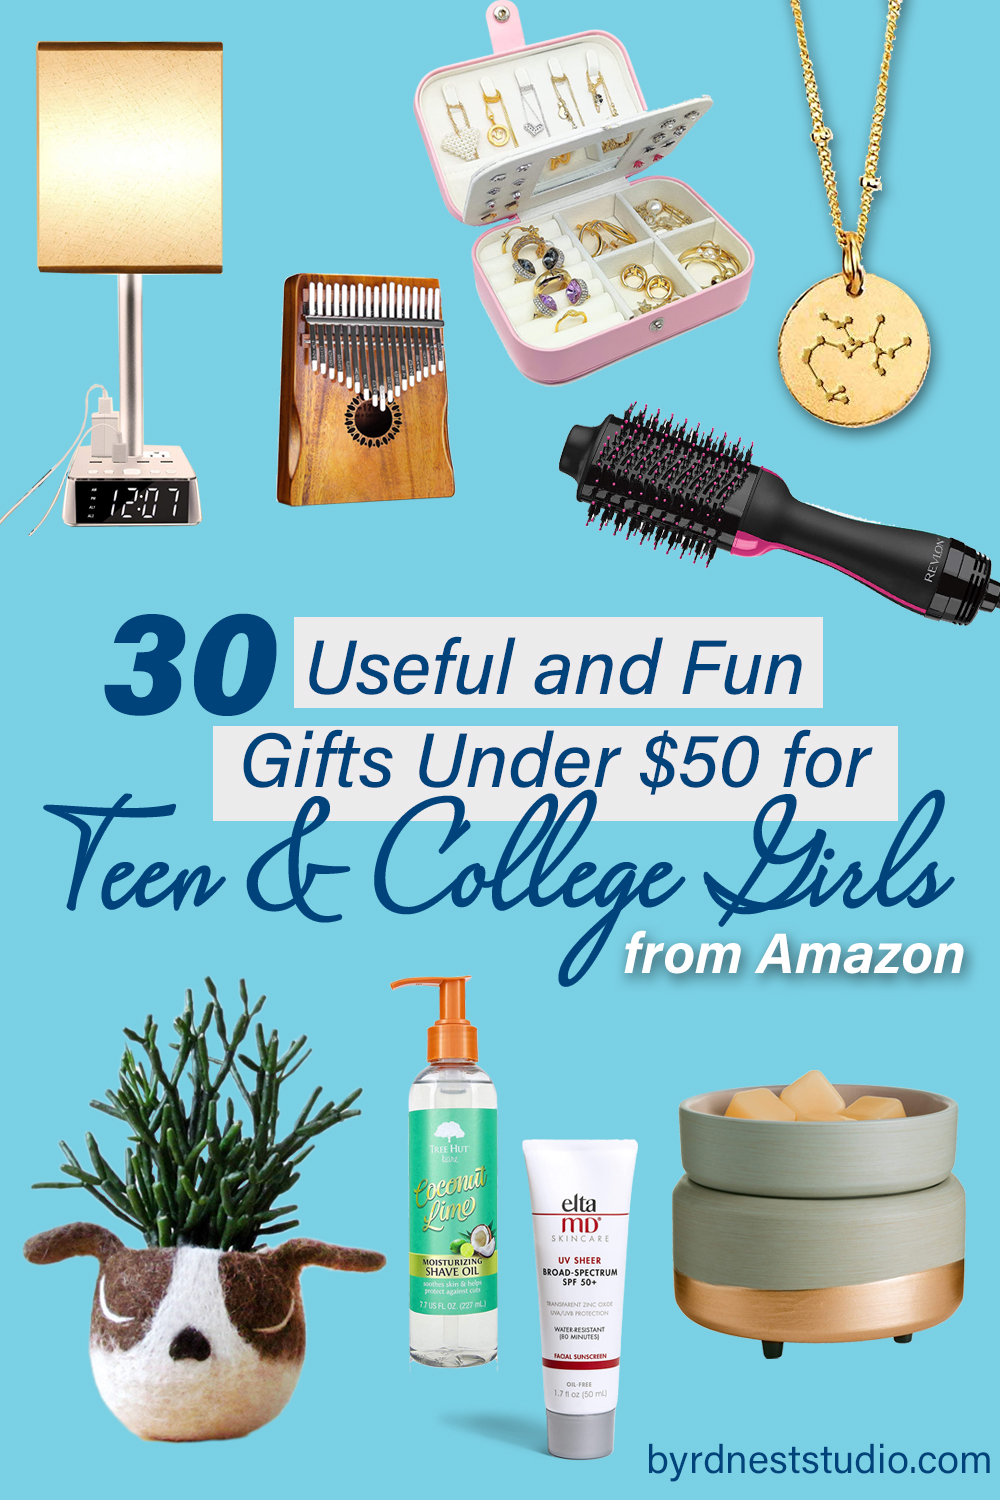 50 Gifts for Couples That Has Everything — 2021 Gift Guide